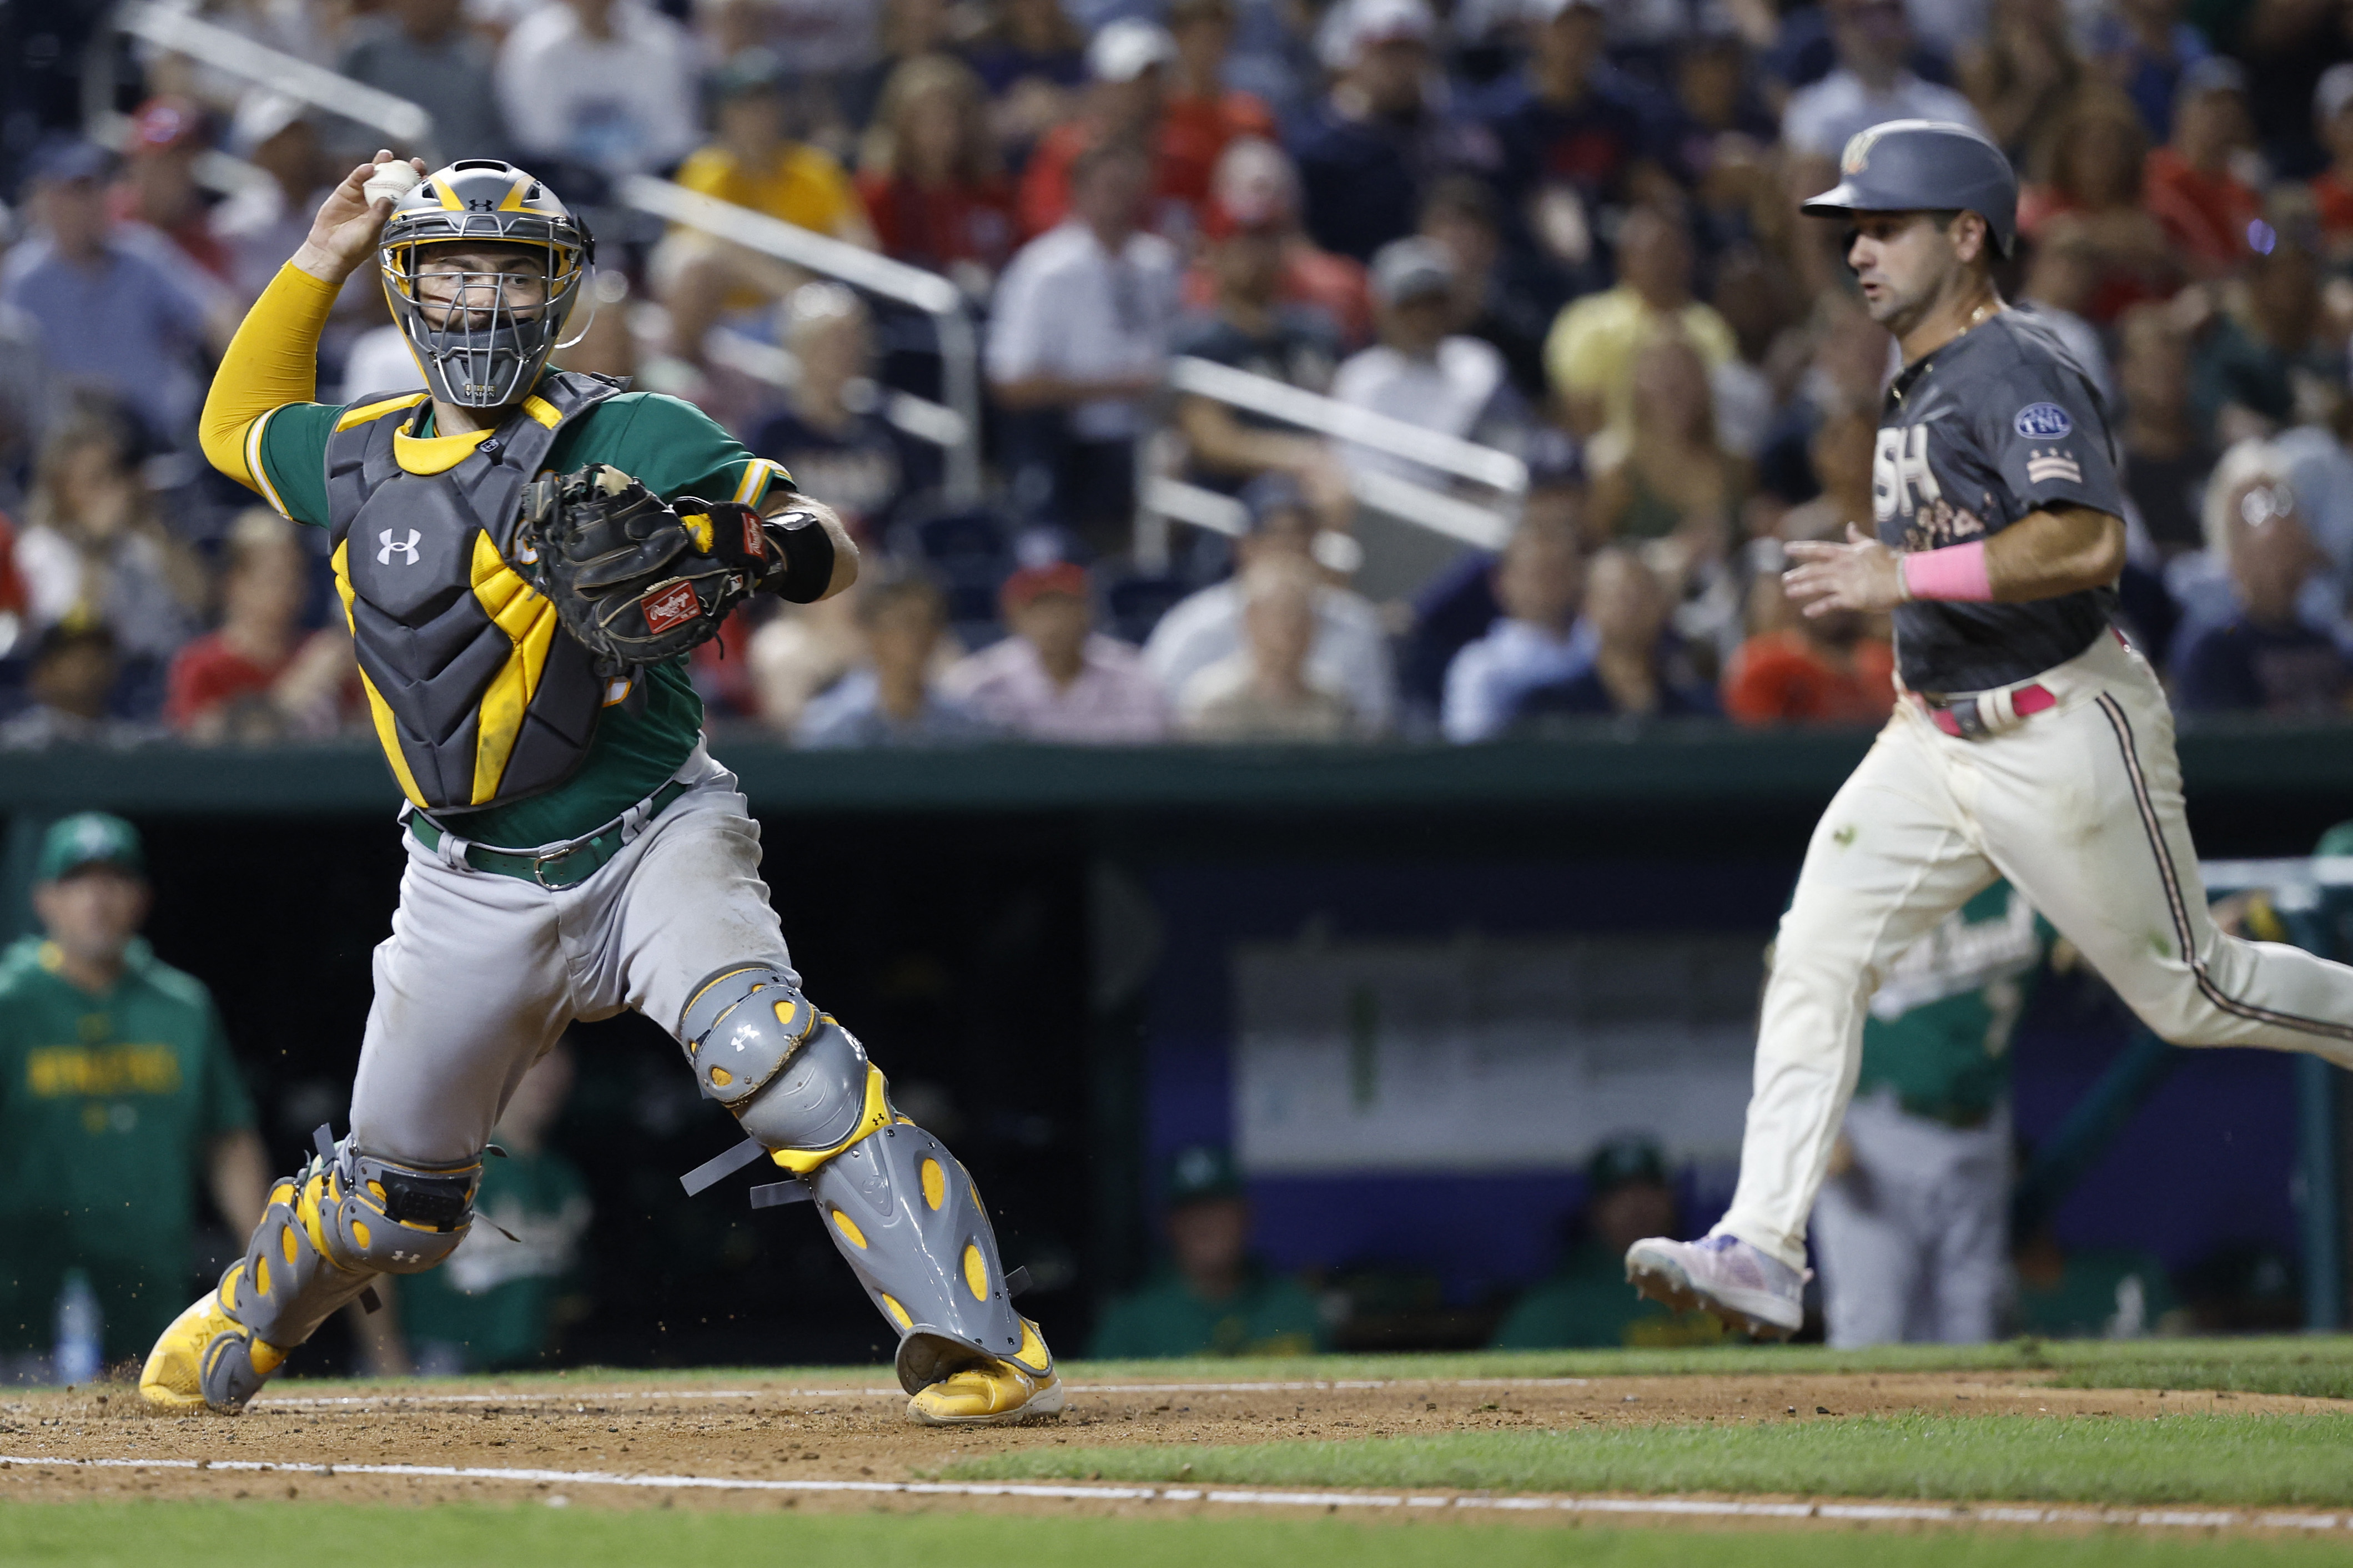 Oakland A's news: Lawrence Butler hits first MLB home run - Athletics Nation